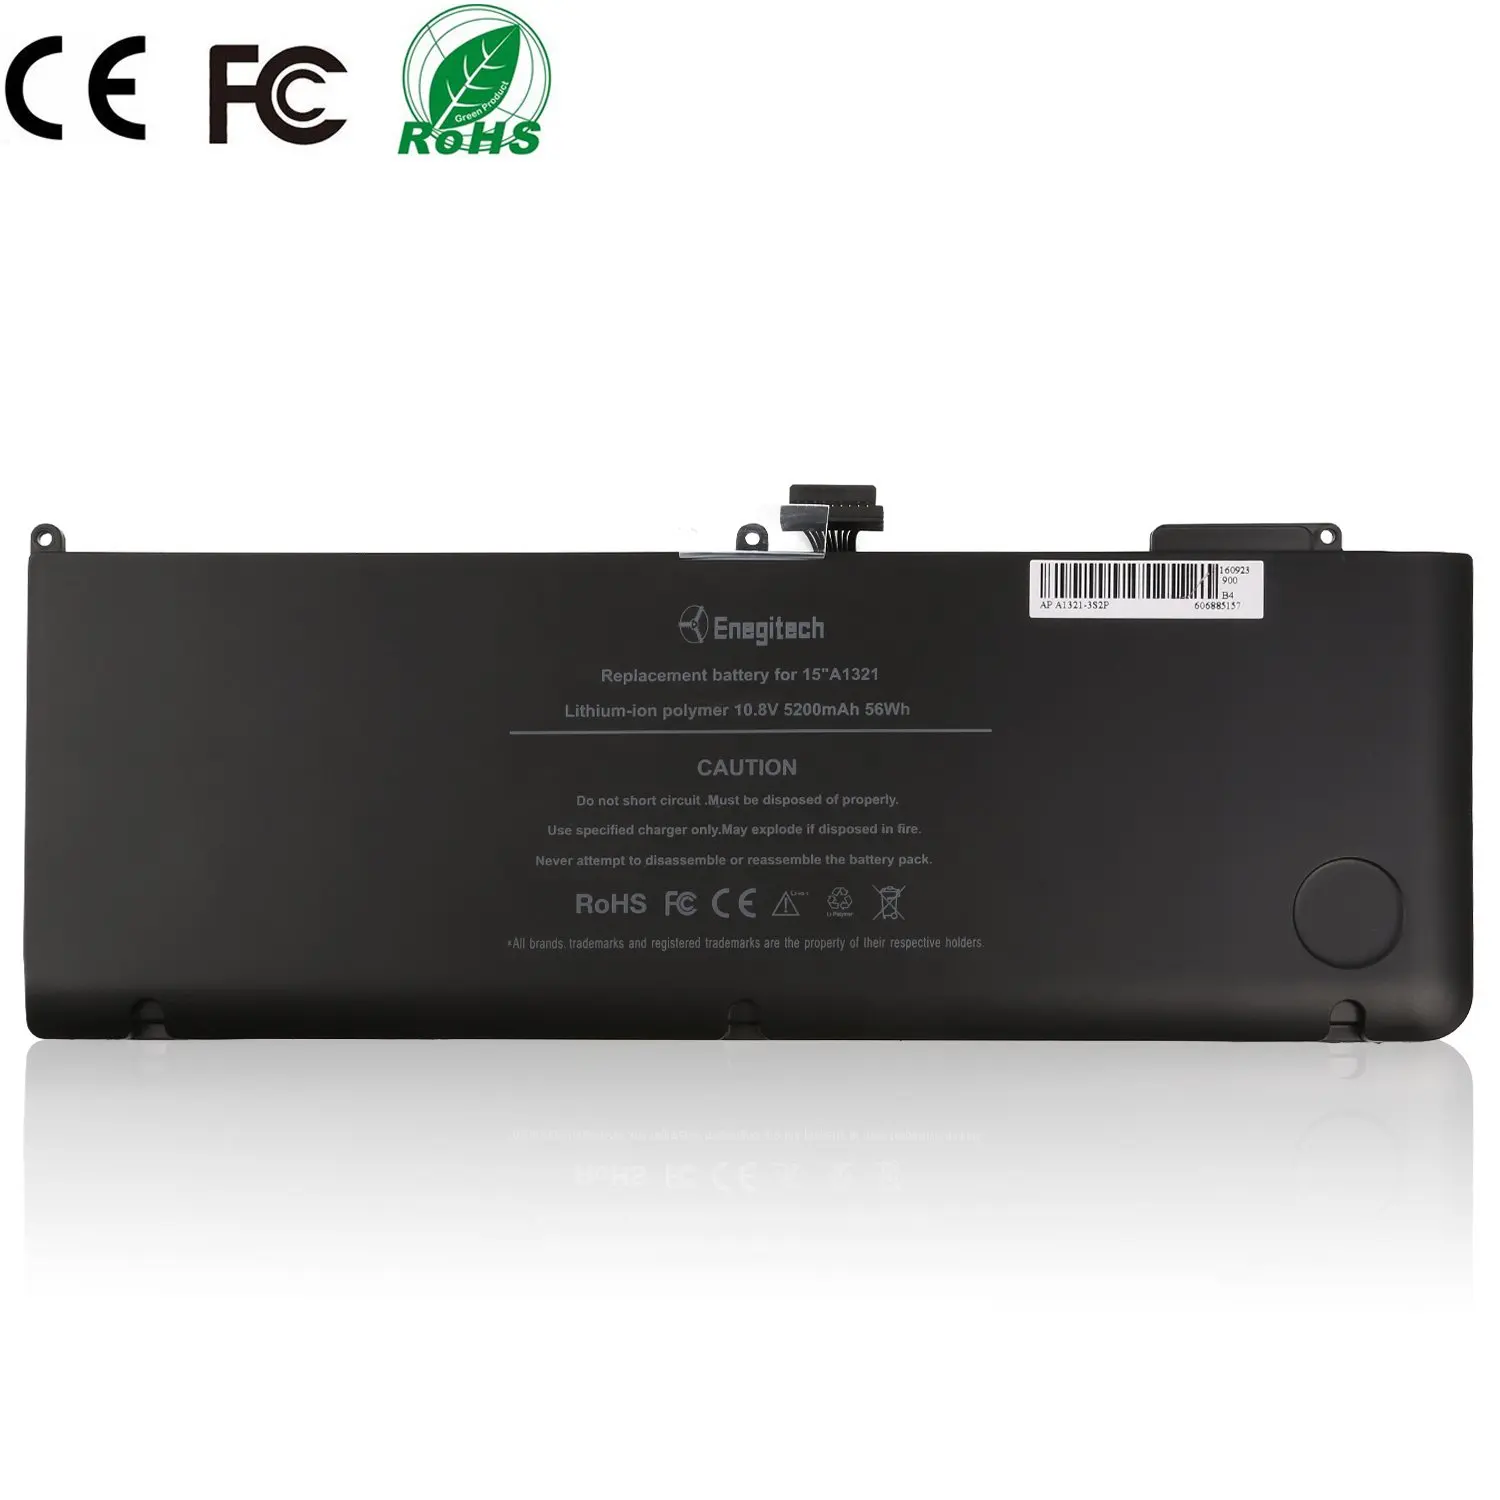 macbook pro mid 2010 battery replacement